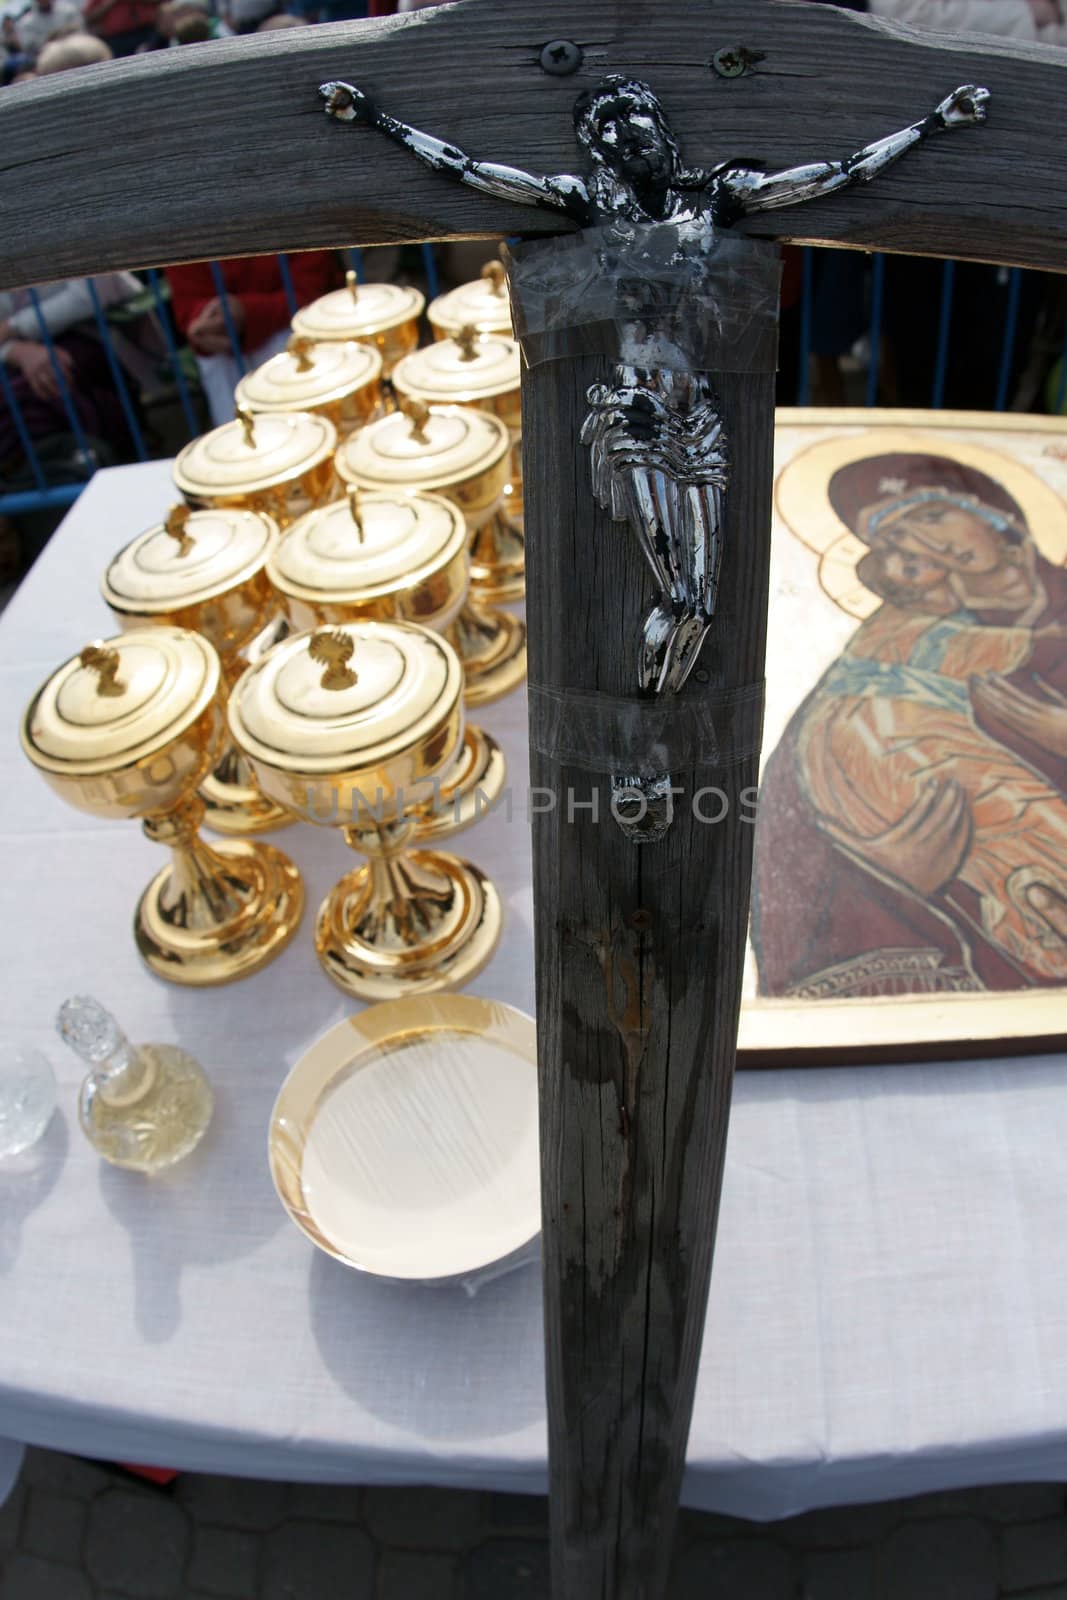 Warszaw, Poland - June 06: sacred vessels in Pi?sudzkiego square on the Cross devotion Pope John  Paul II in the 20th anniversary of the Polish pope. About the pilgrimage: "Let your spirit come down and renew the  face of the earth"